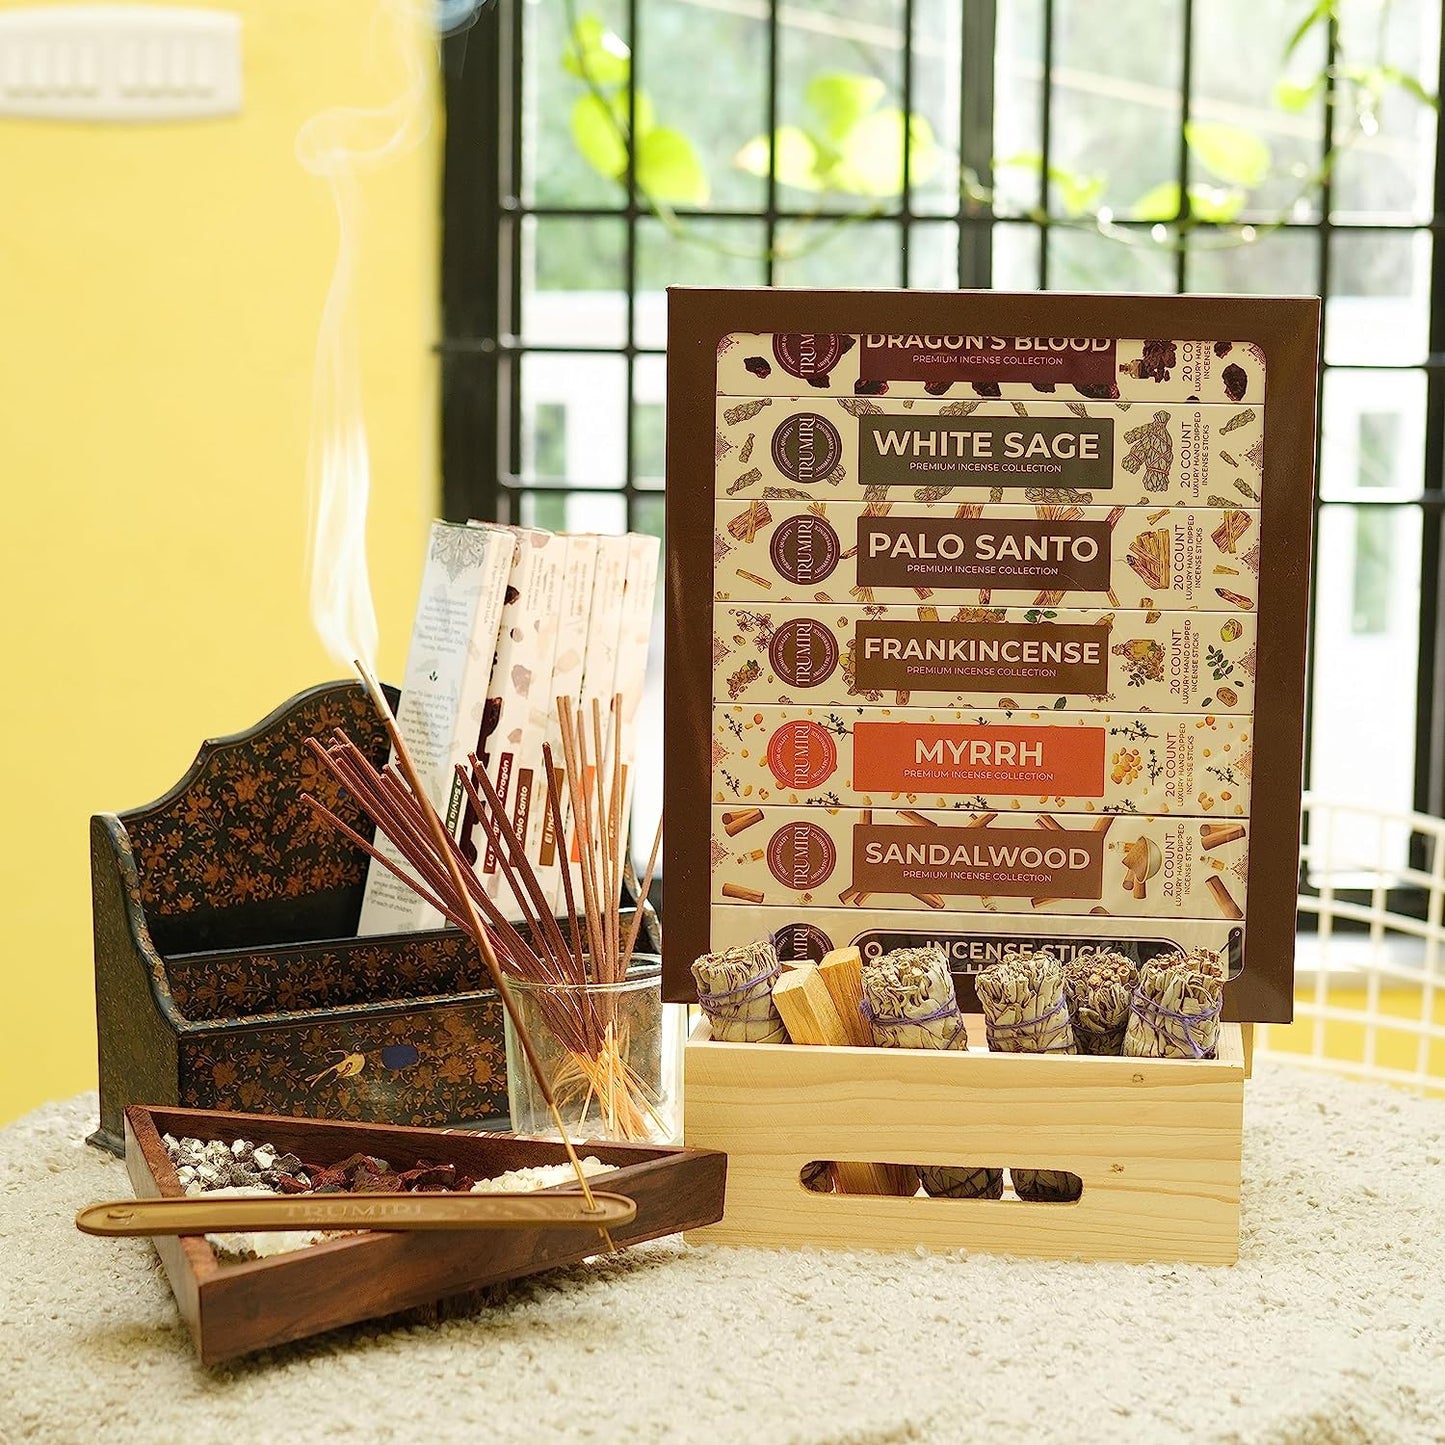 Woody Incense Sticks Variety Pack with Incense Holder